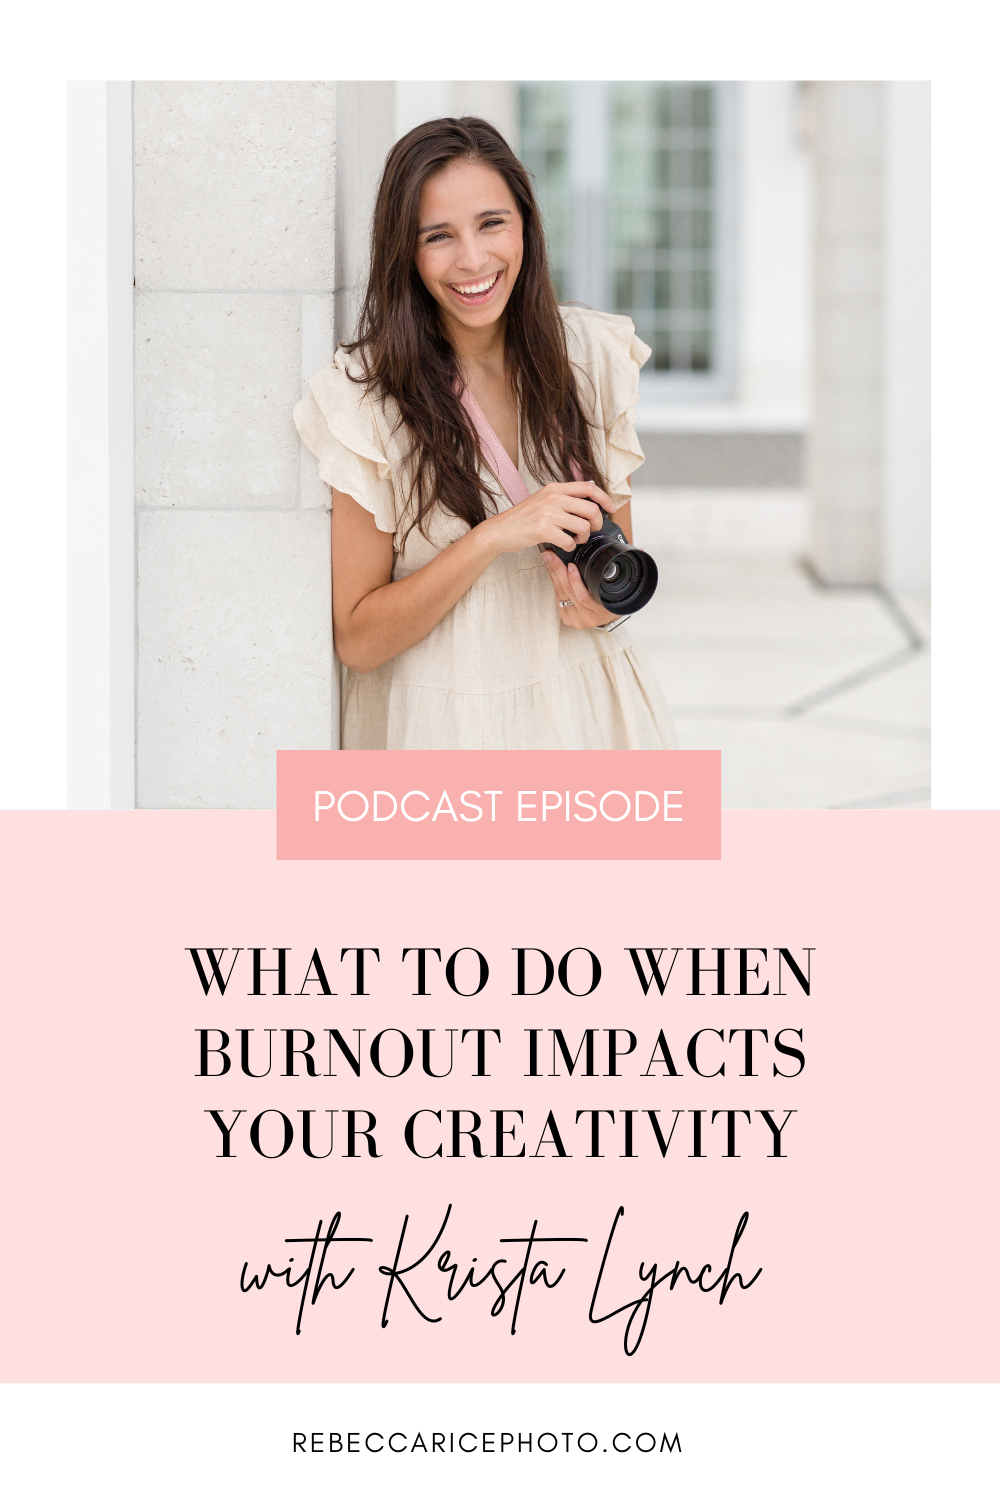 Ep 86 - When Burnout Impacts Your Creativity with Krista Lynch | Burnout Tips